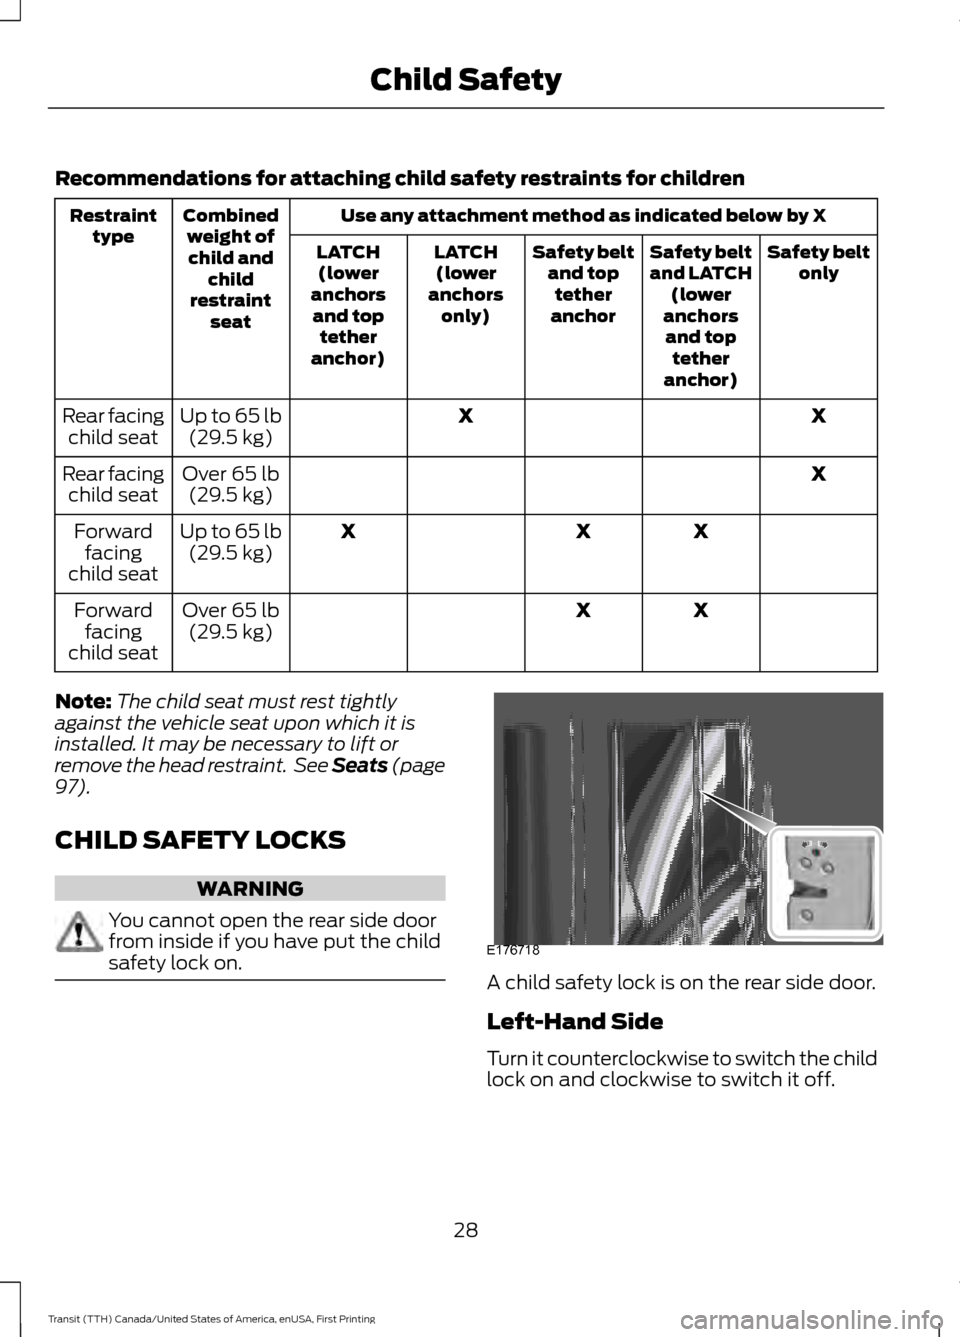 FORD TRANSIT 2016 5.G Owners Guide Recommendations for attaching child safety restraints for children
Use any attachment method as indicated below by X
Combined
weight ofchild and child
restraint seat
Restraint
type Safety belt
only
Sa